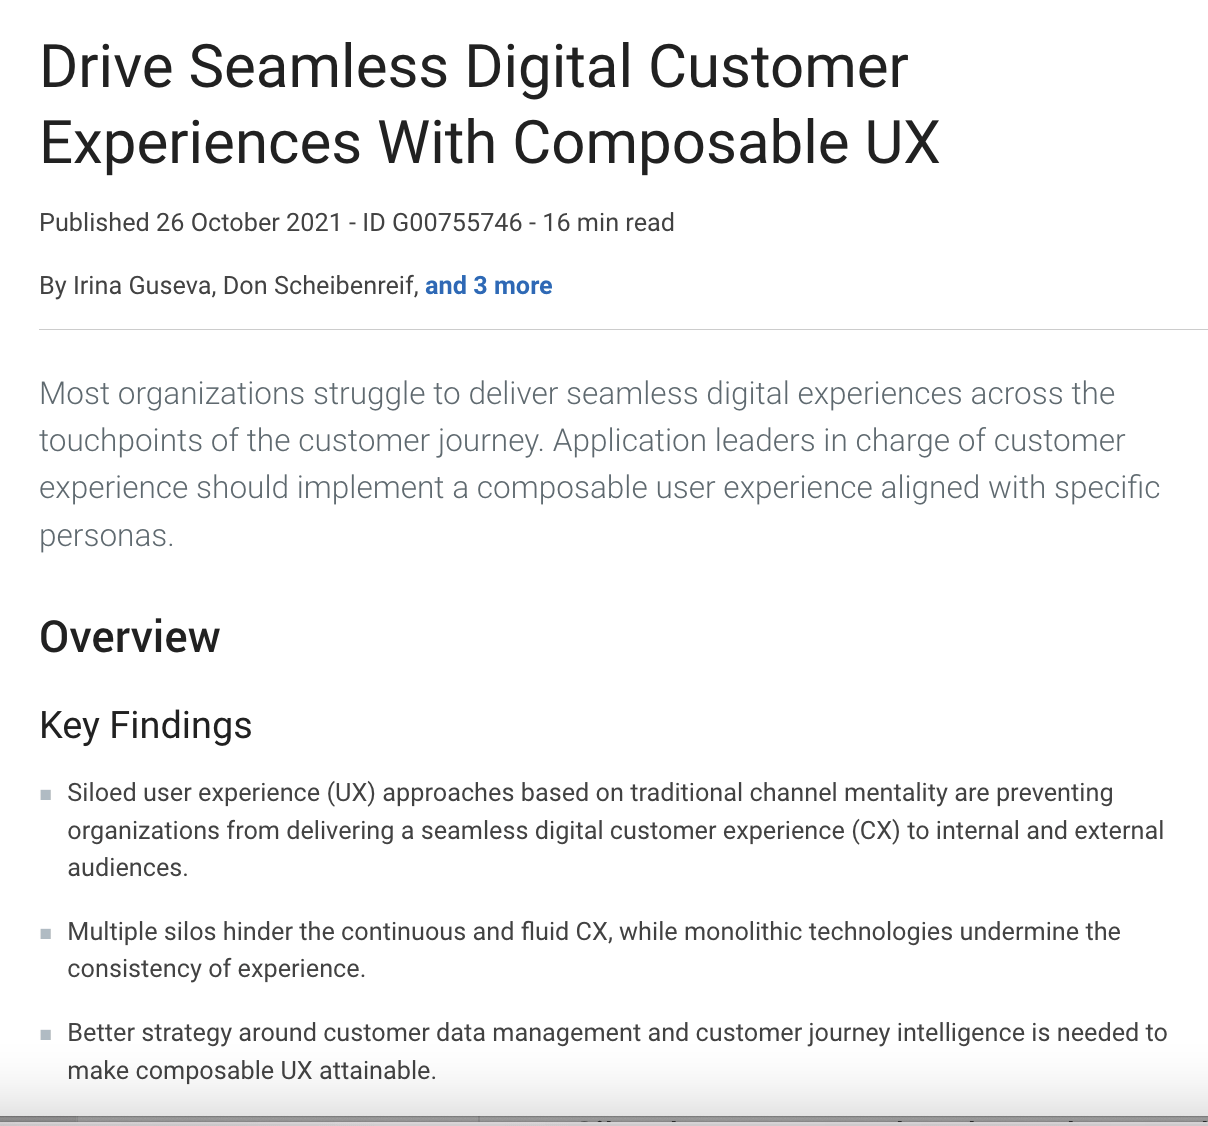 Contentstack a Strong Performer - Gartner: Drive Seamless Digital Customer Experiences with Composable UX